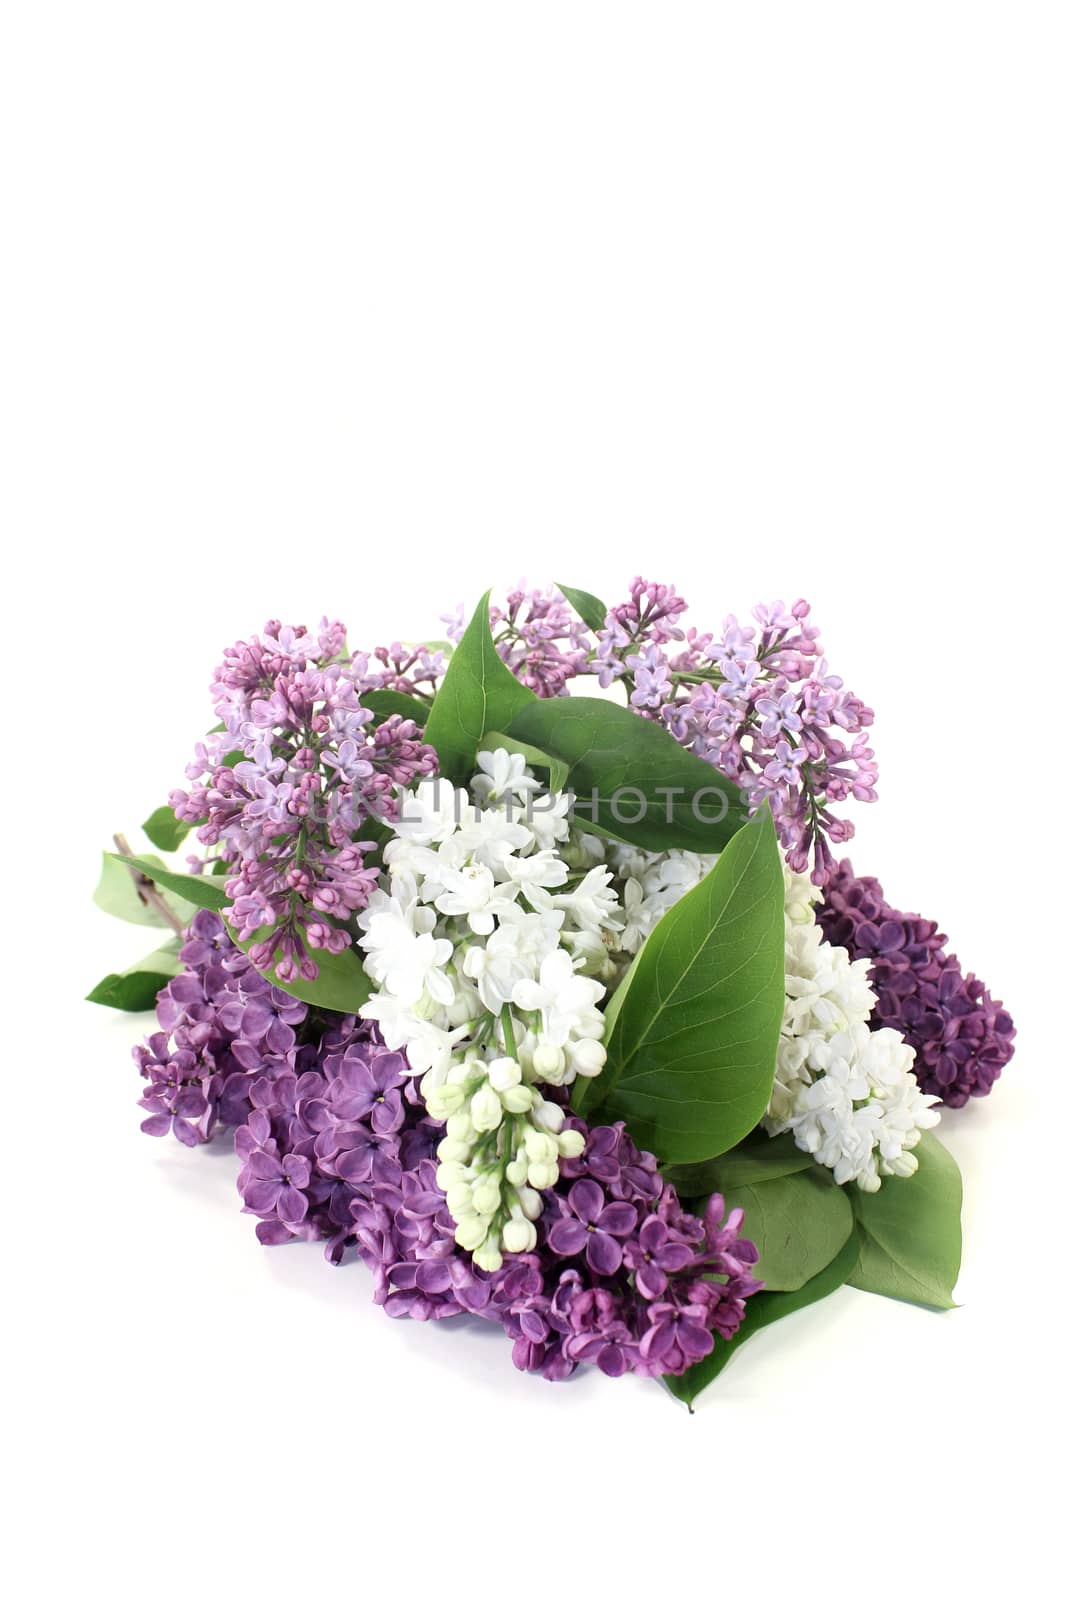 a bouquet of colorful lilac blossoms on a light background